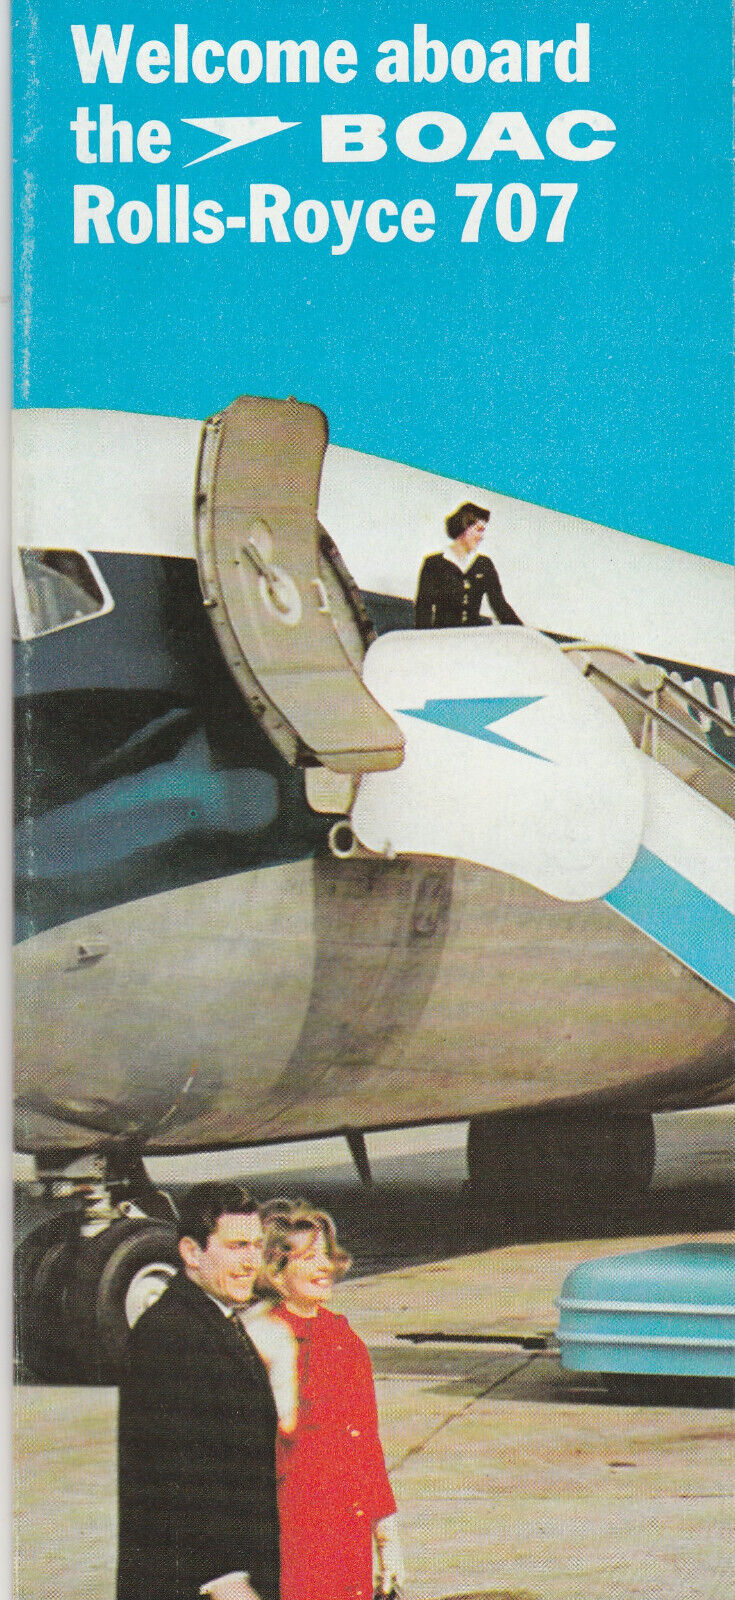 BOAC UK airline Welcome Aboard the Rolls-Royce 707 promotion brochure 1969